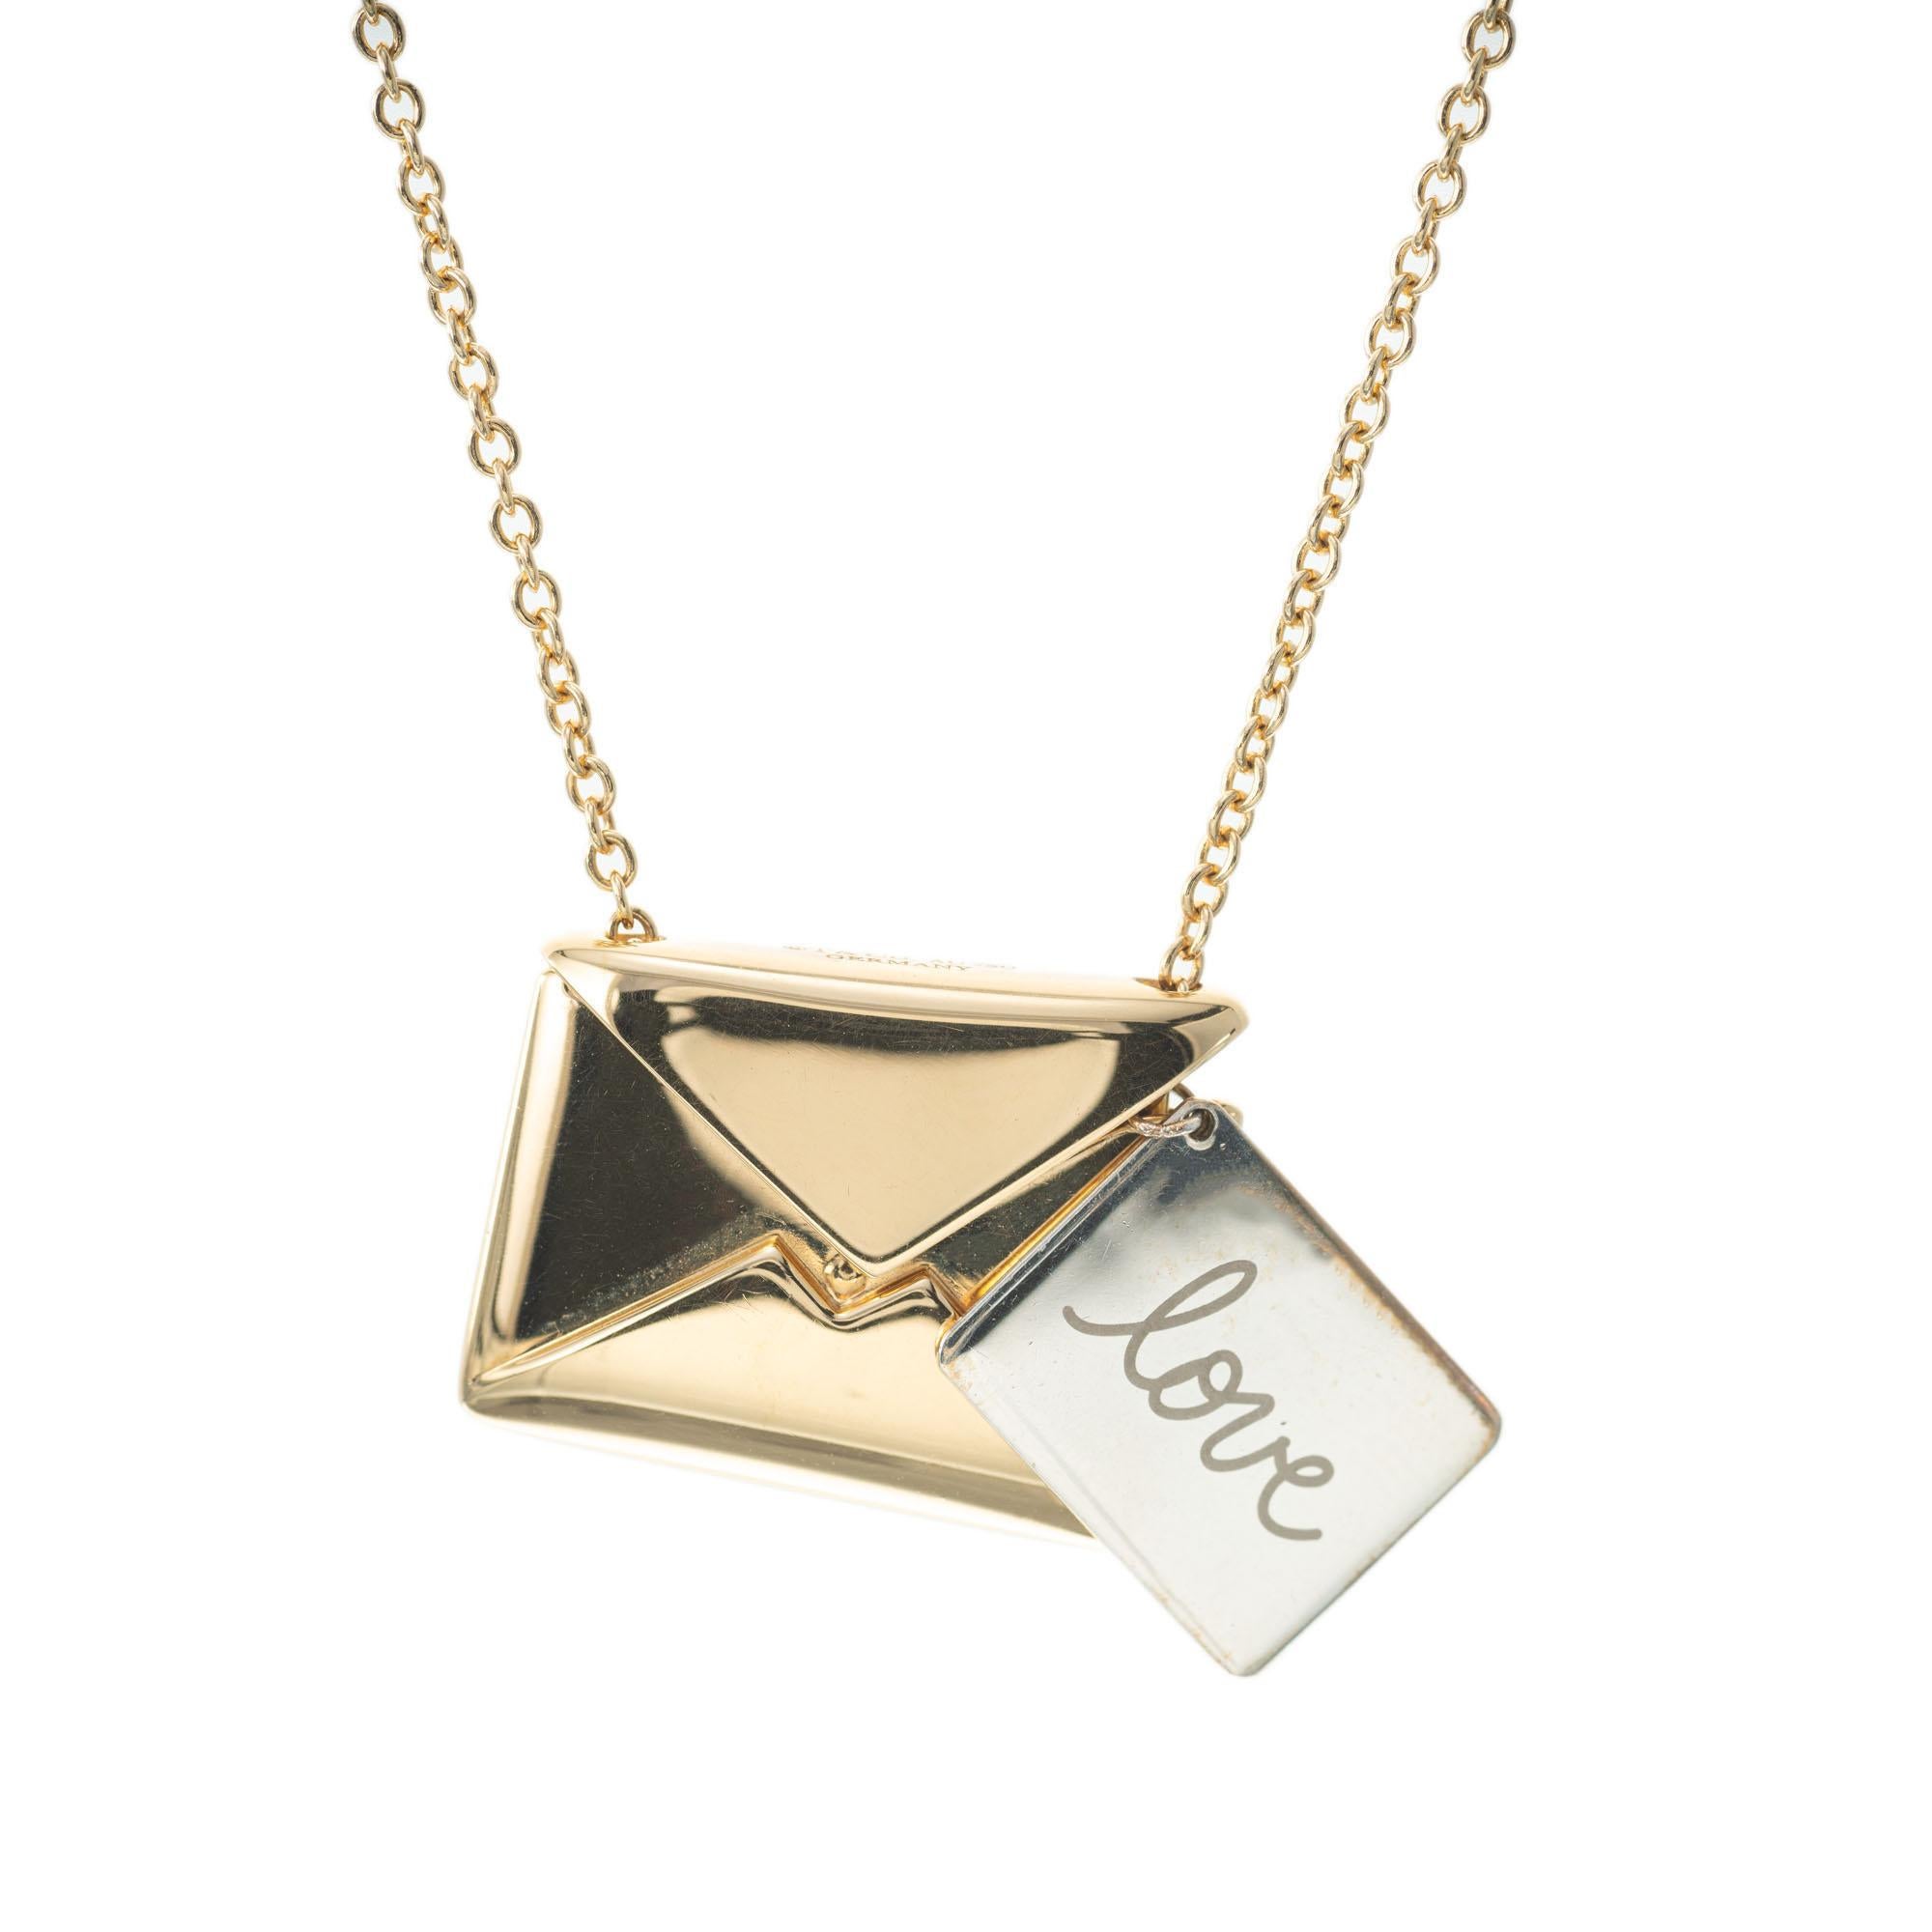 Tiffany & Co sweet nothing envelope necklace in 18k yellow gold. The top of the envelope opens with sterling silver “LOVE” note inside. Hallmark on back of envelope, on top of the envelope, on love note and on clasp tag. Tiffany box and pouch